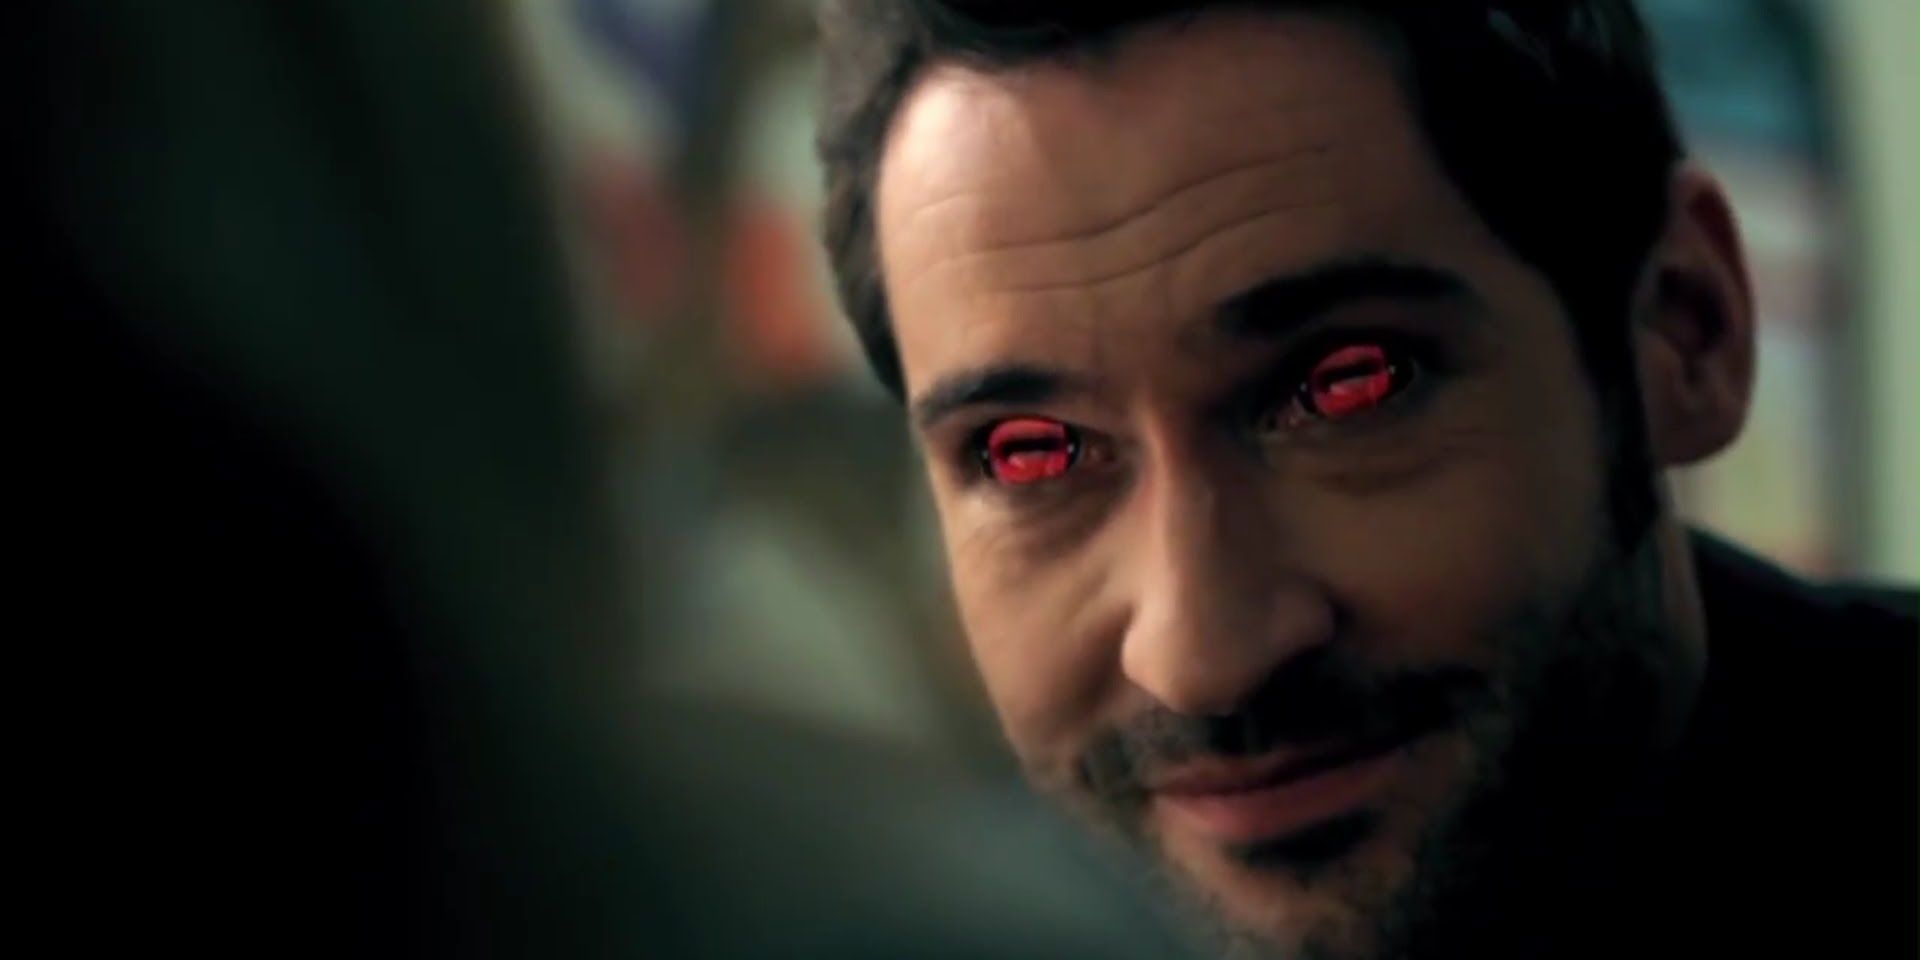 15 Devilish Quotes From Lucifer